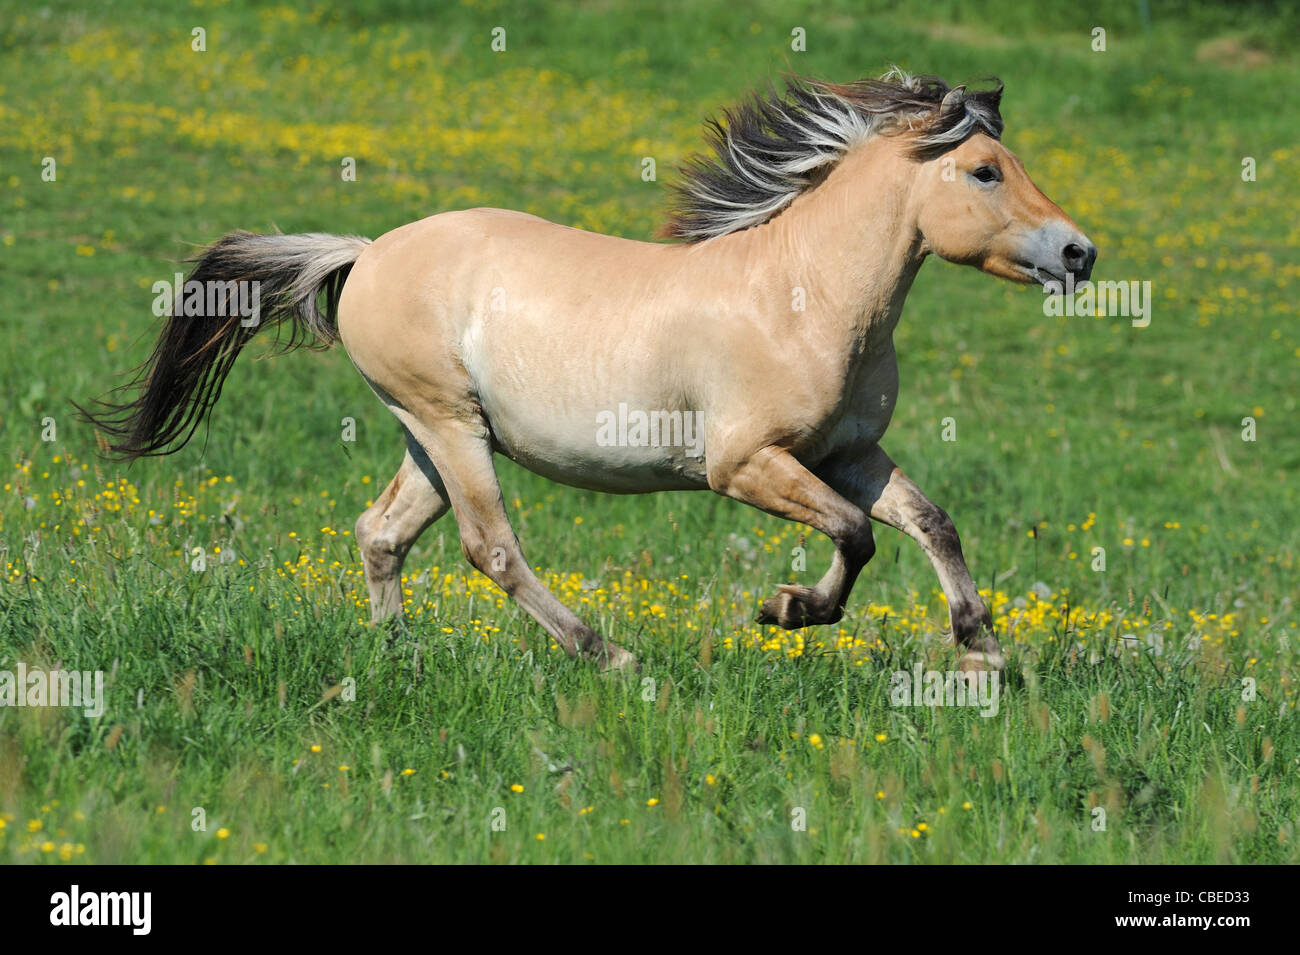 Norwegian Fjord Horse (Equus ferus caballus). Colt in a gallop on a meadow. Stock Photo